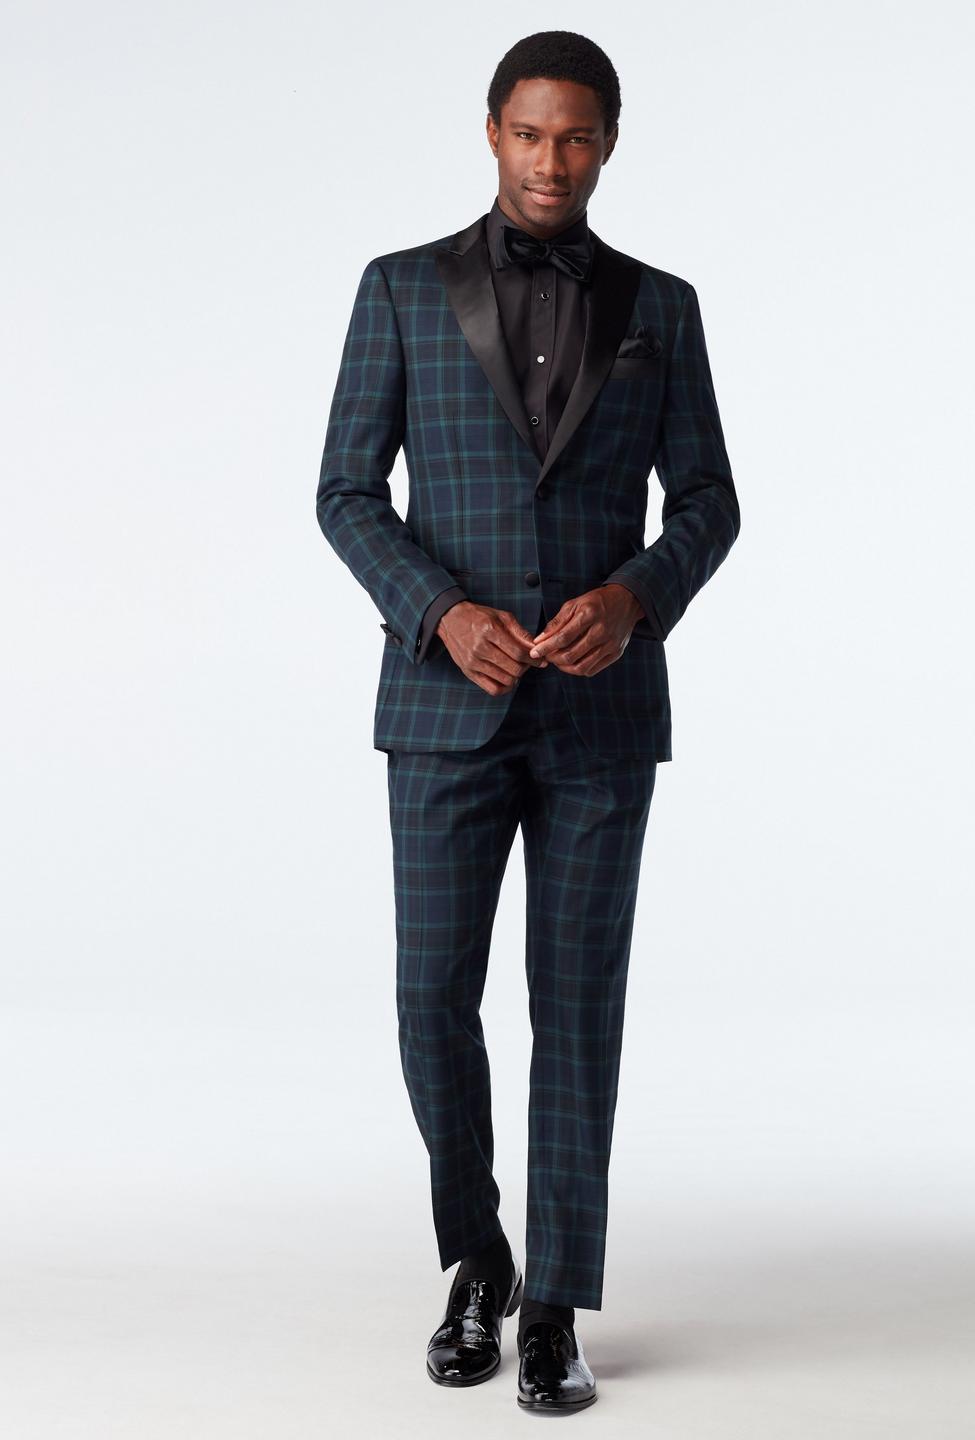 Navy suit - Hampton Plaid Design from Tuxedo Indochino Collection